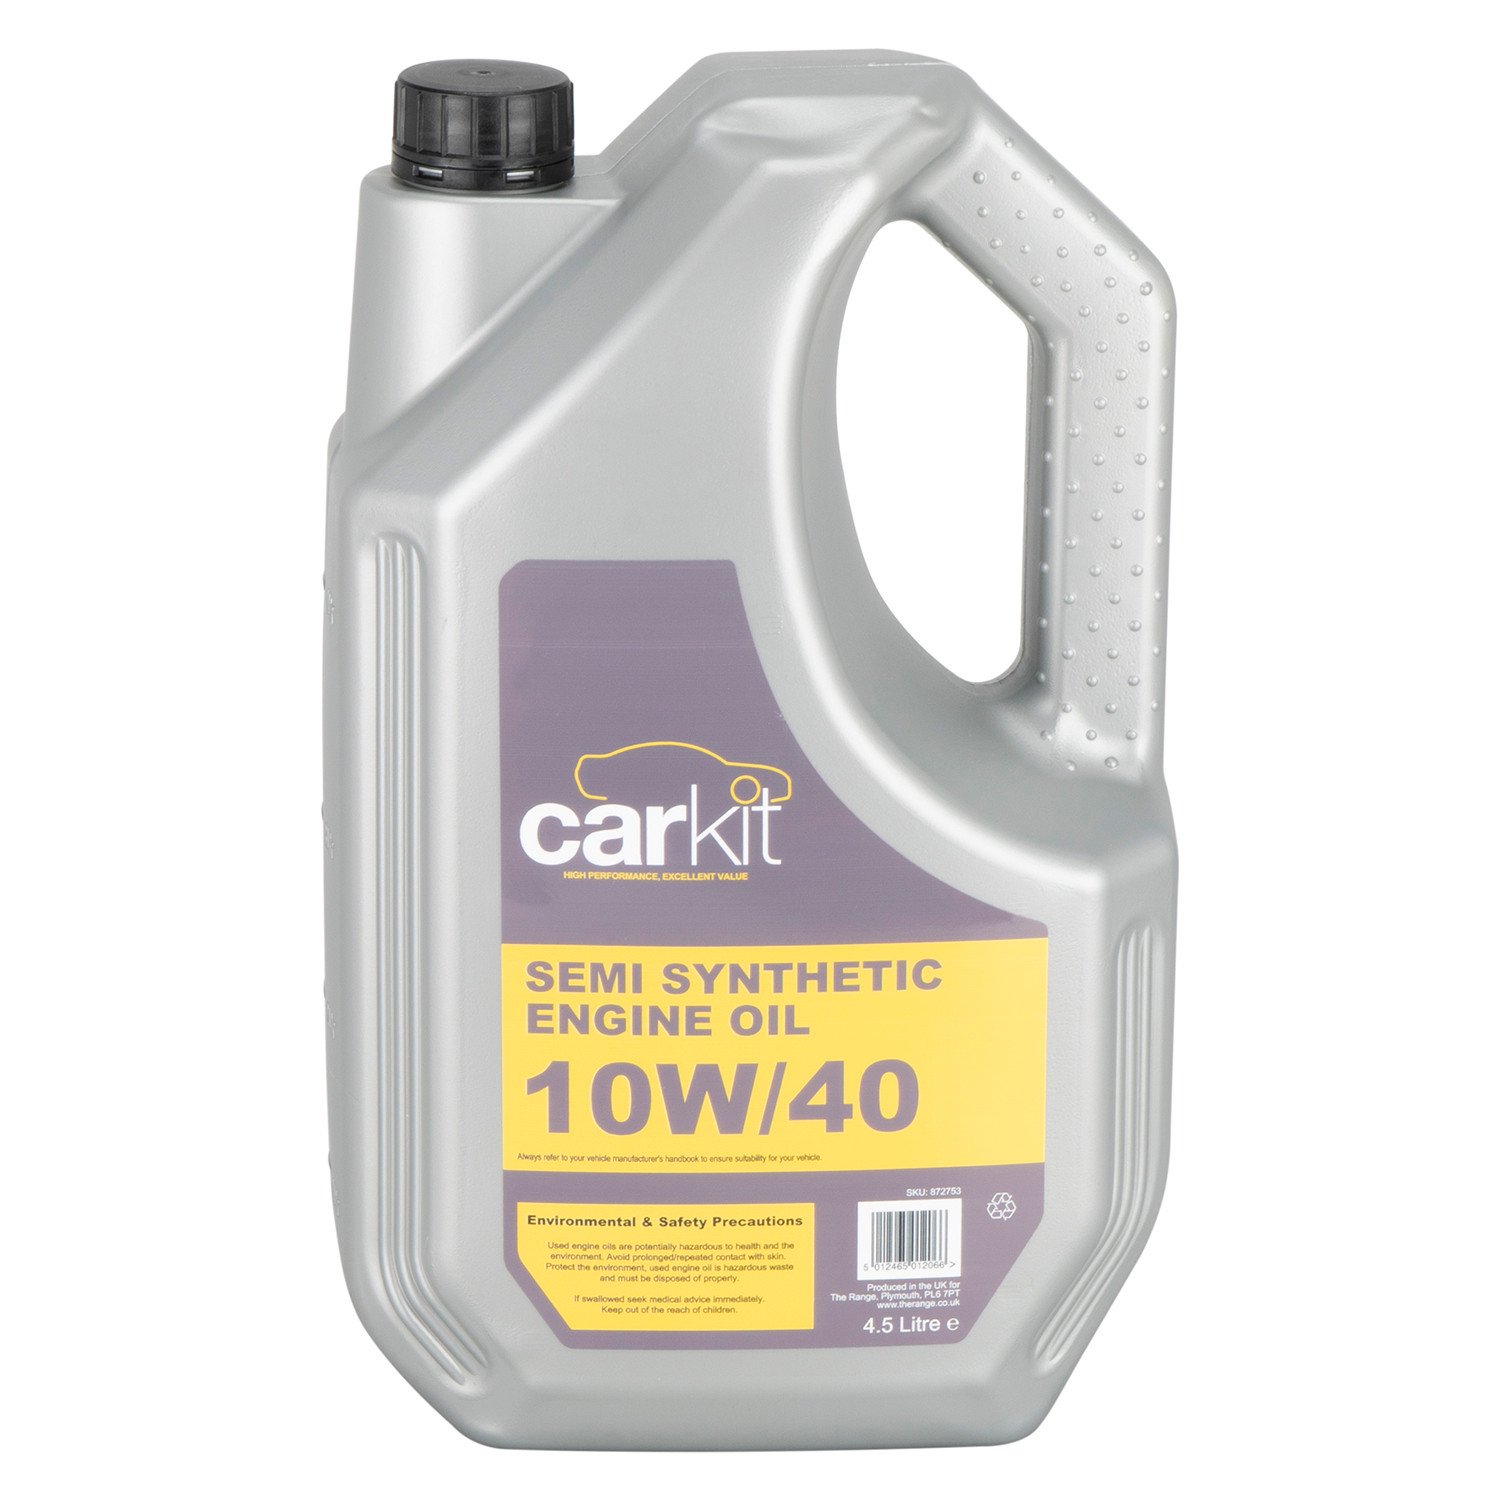 Carkit 10W/40 Semi Synthetic Engine Oil Image